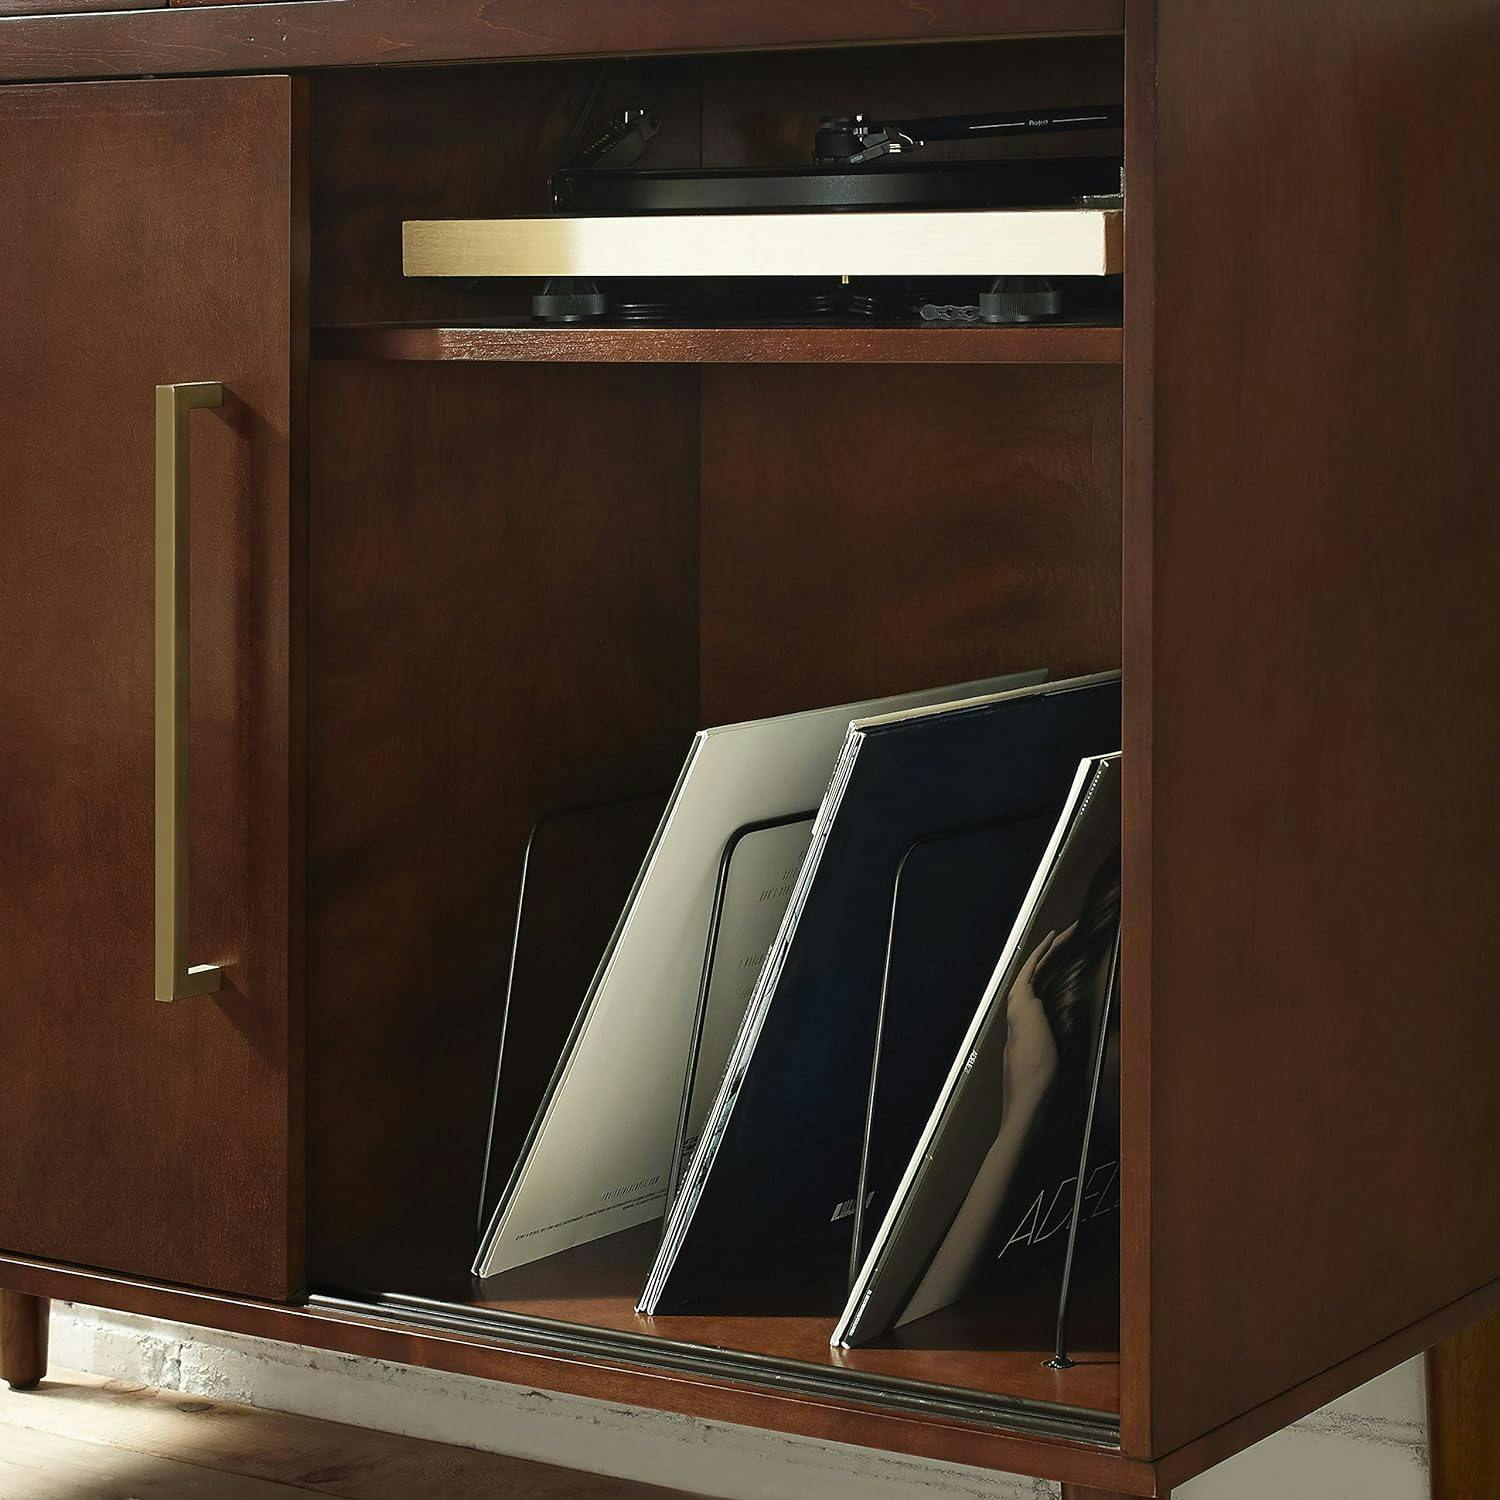 Everett Mid-Century Modern Brown Media Console with Record Storage